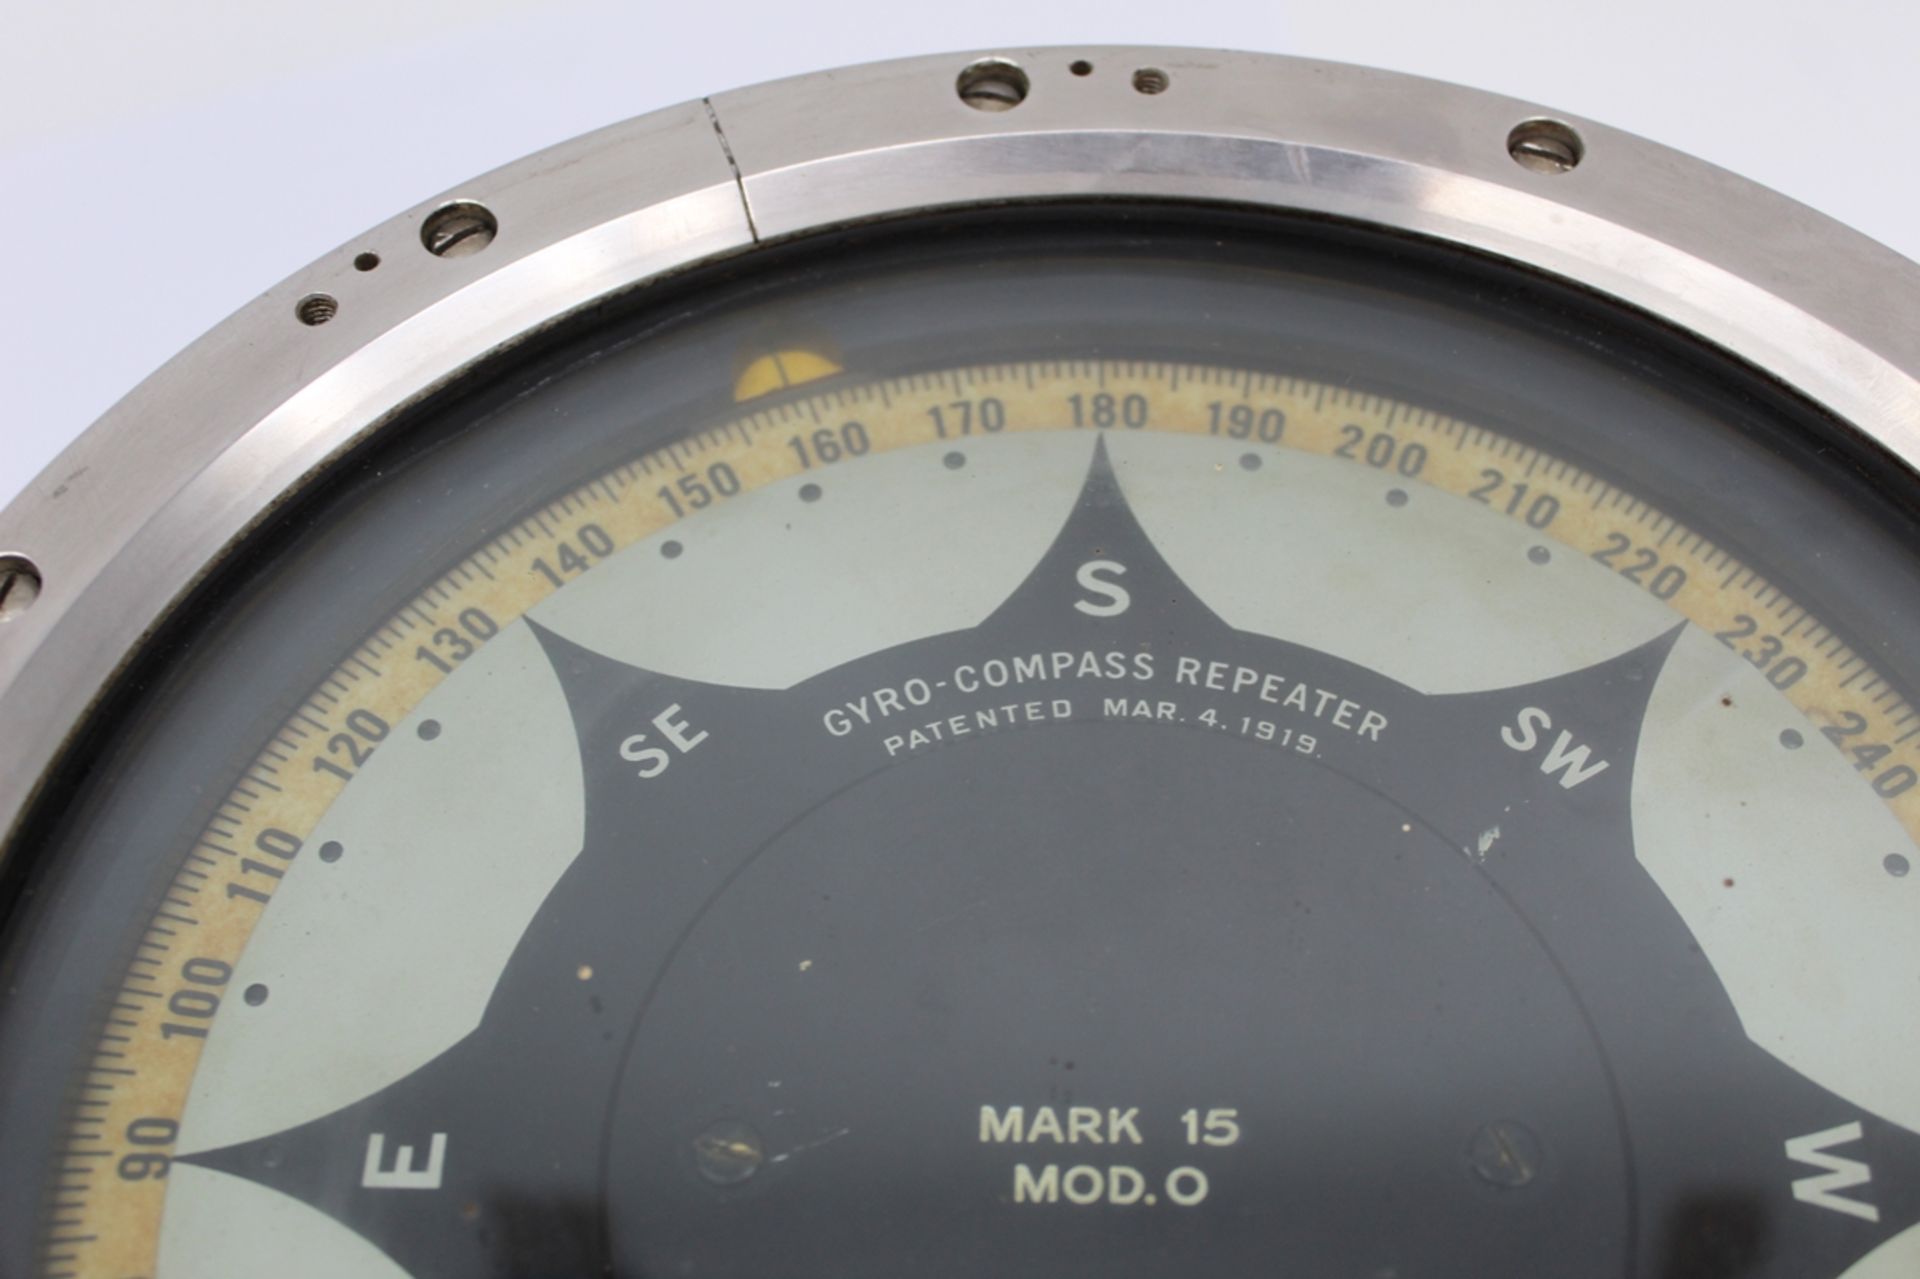 Sperry Gyro Compass Repeater "Mark 15" New York, H-19 cm, D-25 cm - Image 5 of 13